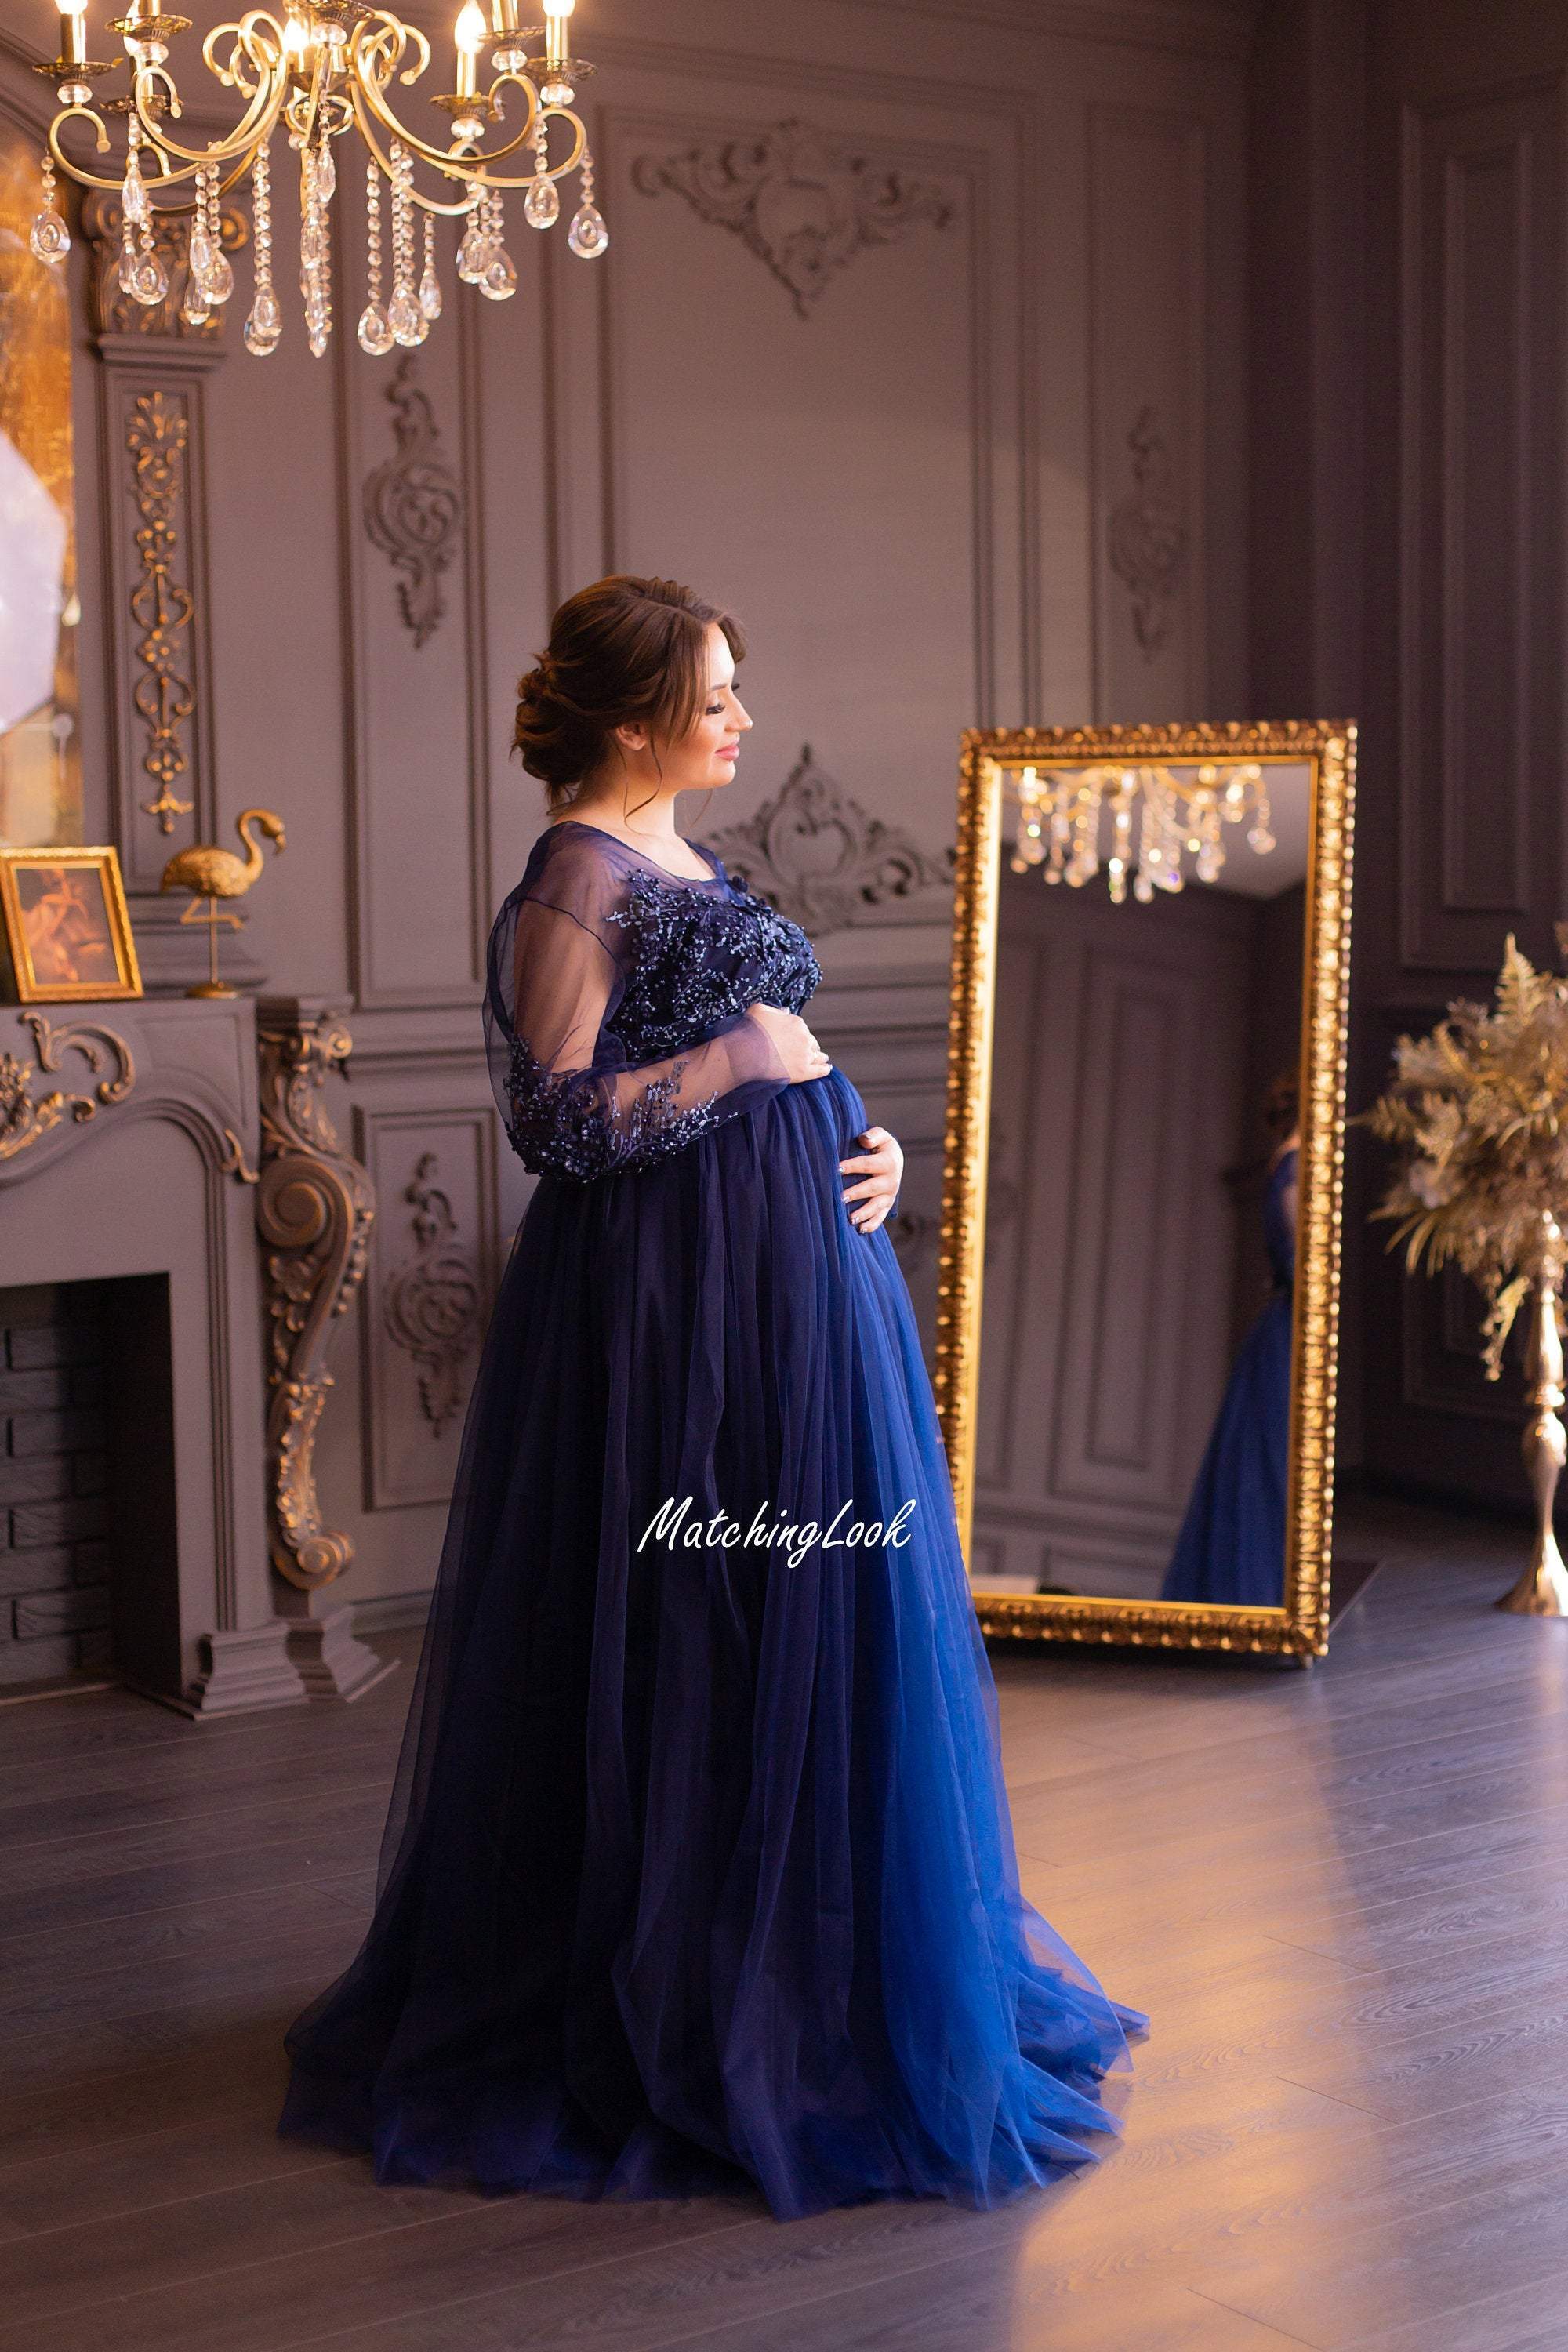 navy blue maternity dress baby shower dress long lace dress tulle maternity dress for photoshoot pregnancy gown maternity gown ball matchinglook